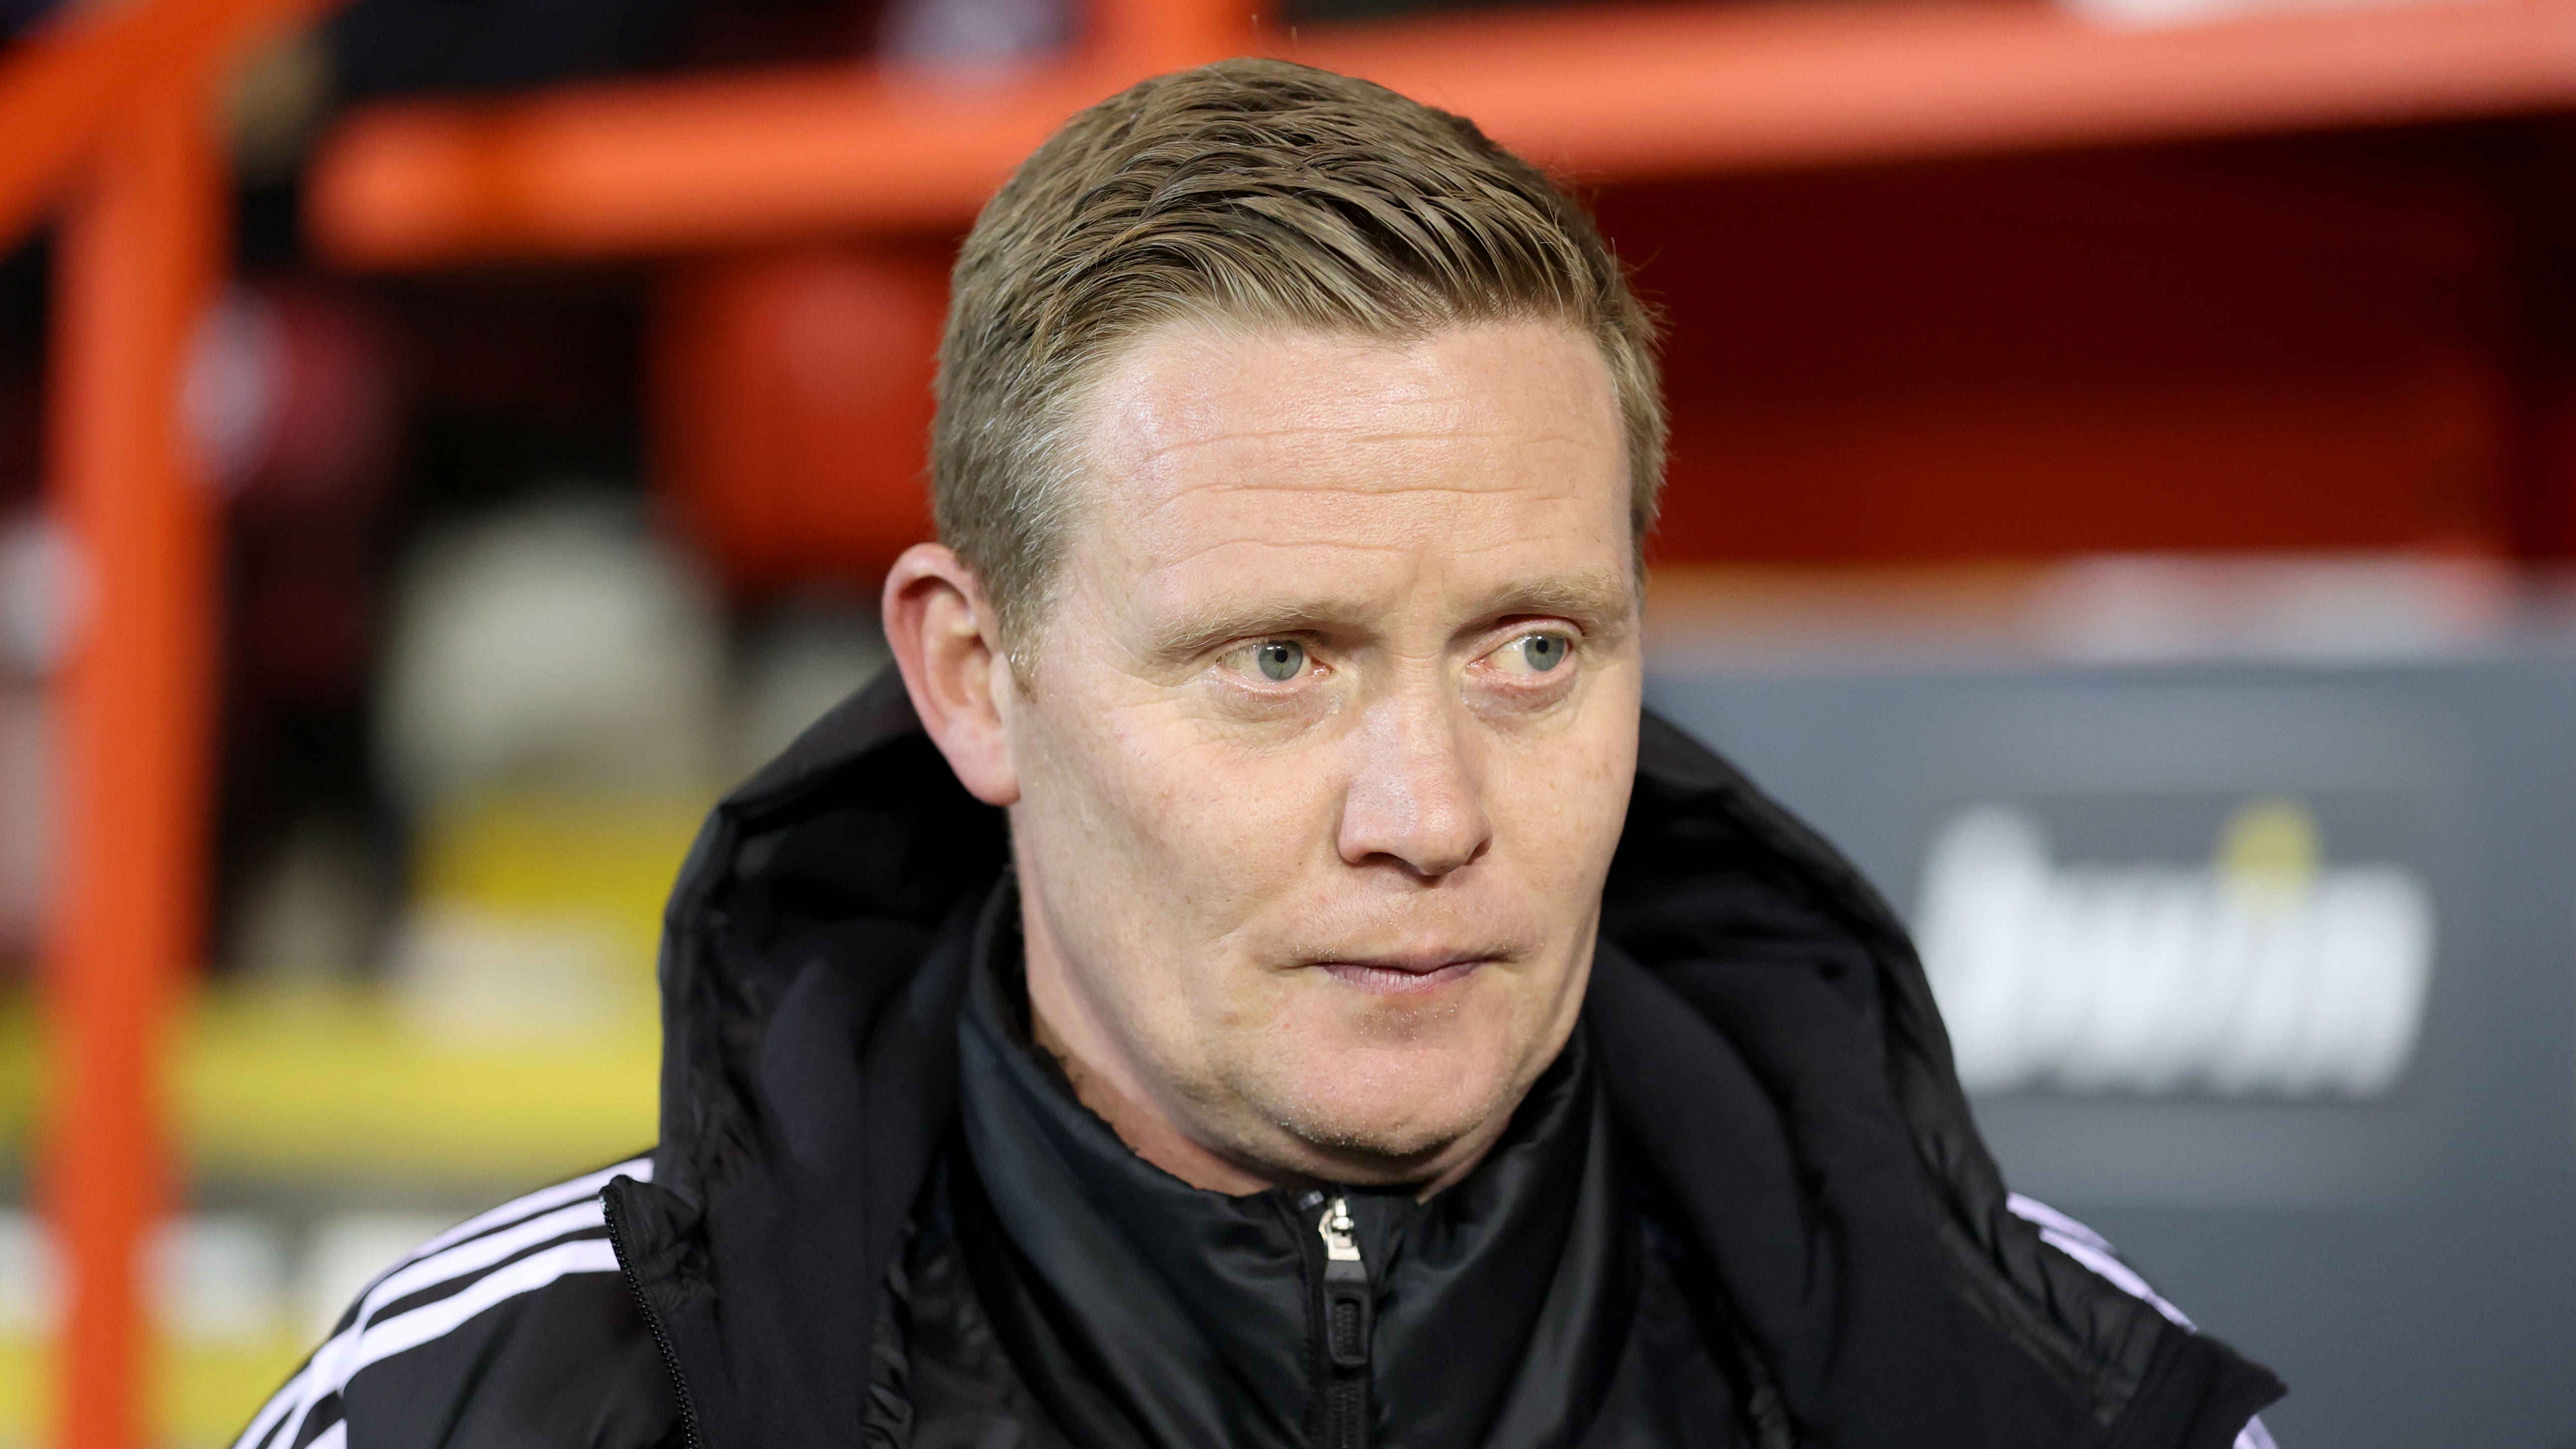 Aberdeen boss Barry Robson wants a ‘positive’ Pittodrie for Dundee clash